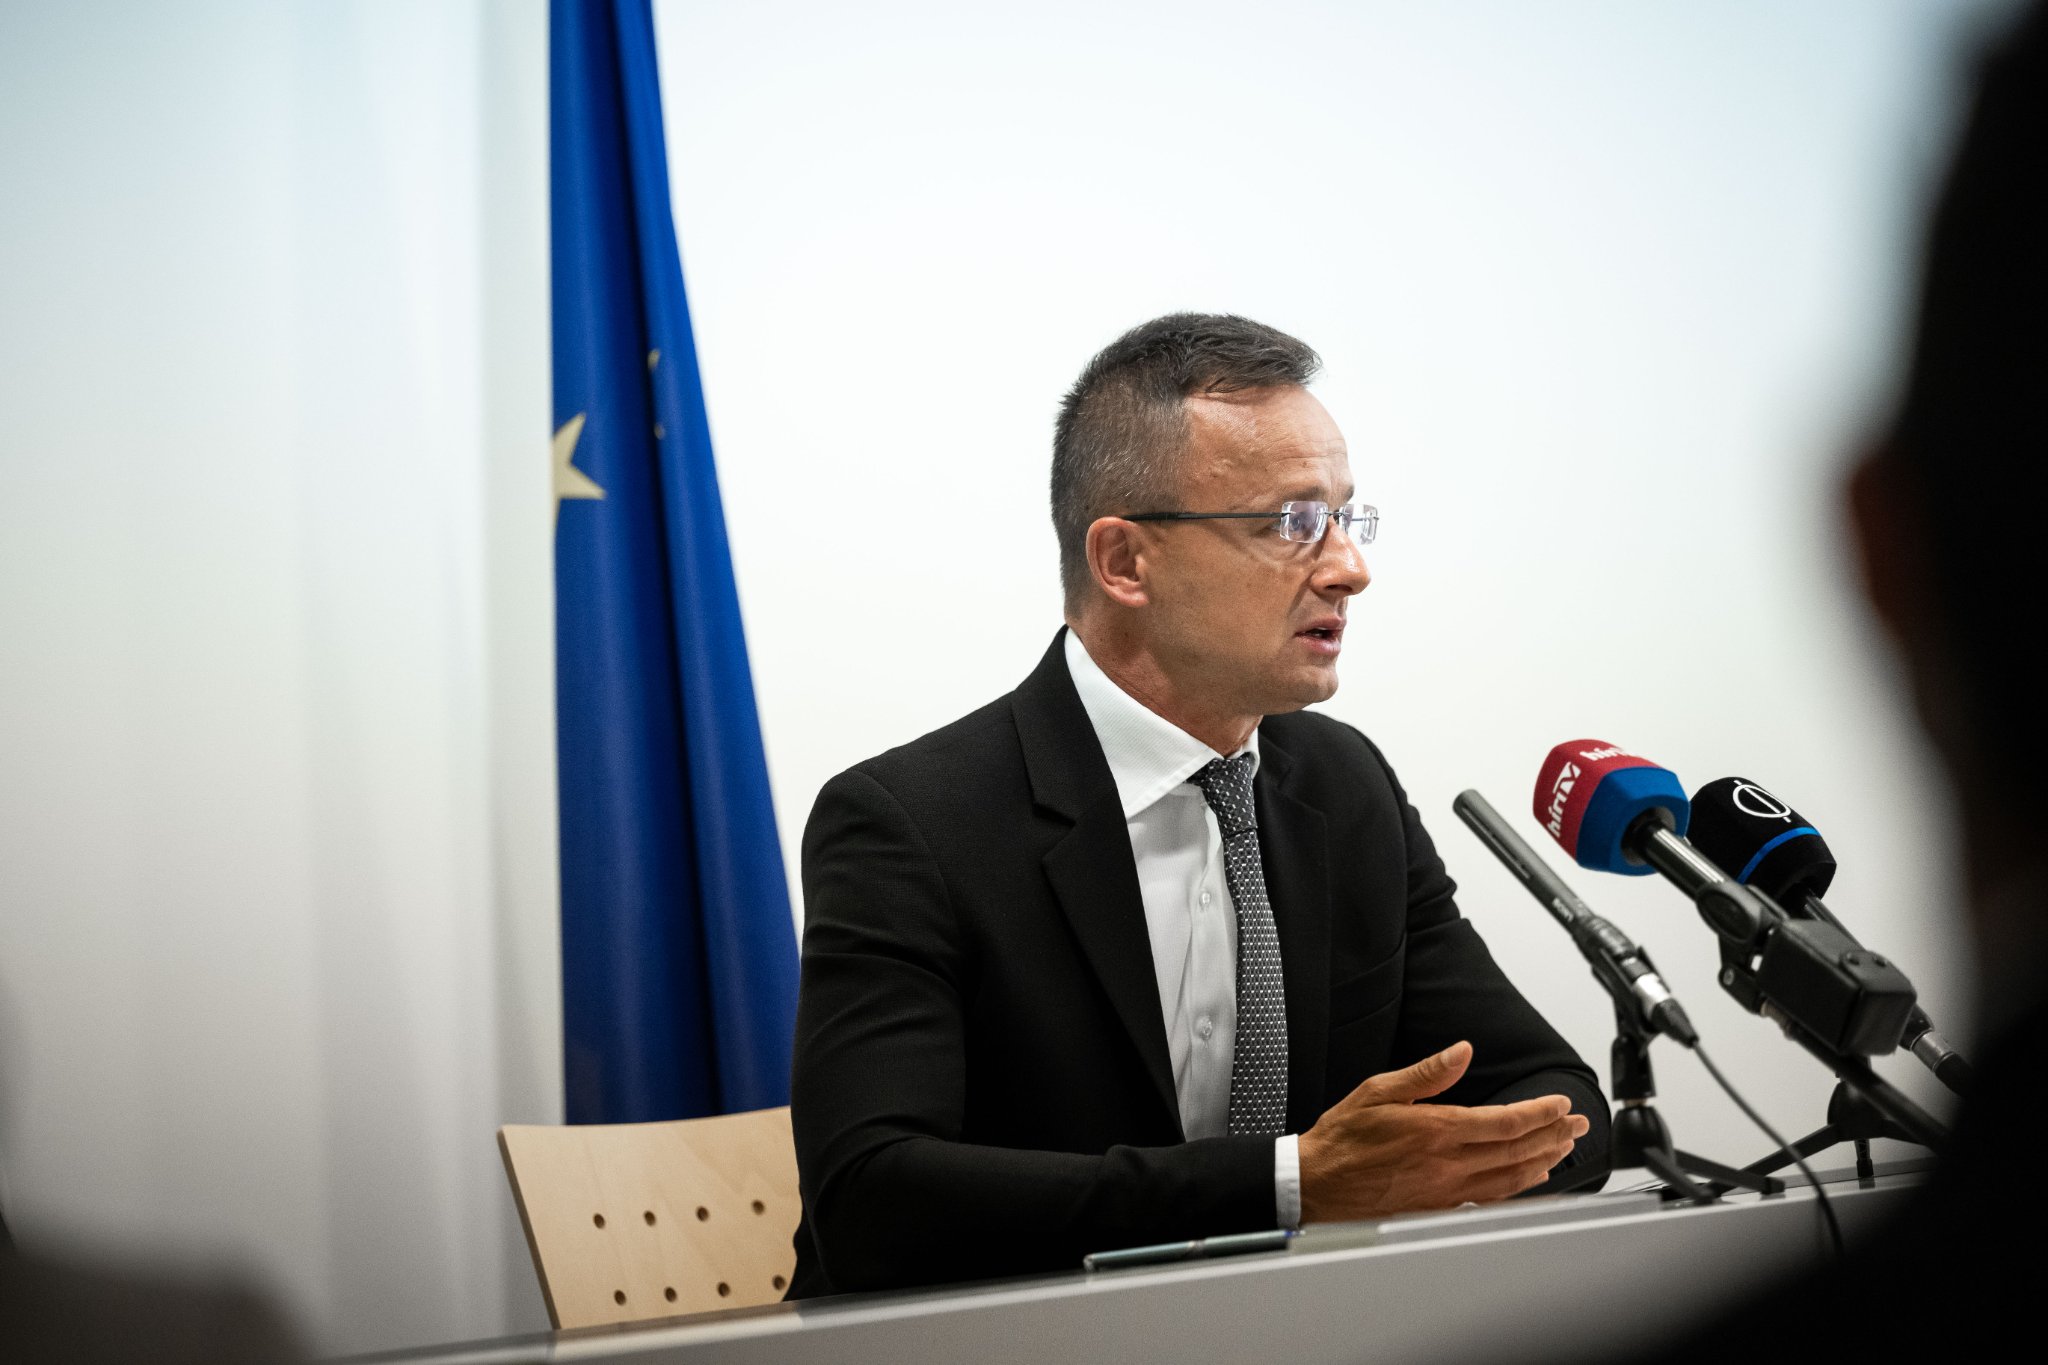 Foreign Minister: Hungary Opposes EU's Phase-out Deadline of Conventional Car Engines